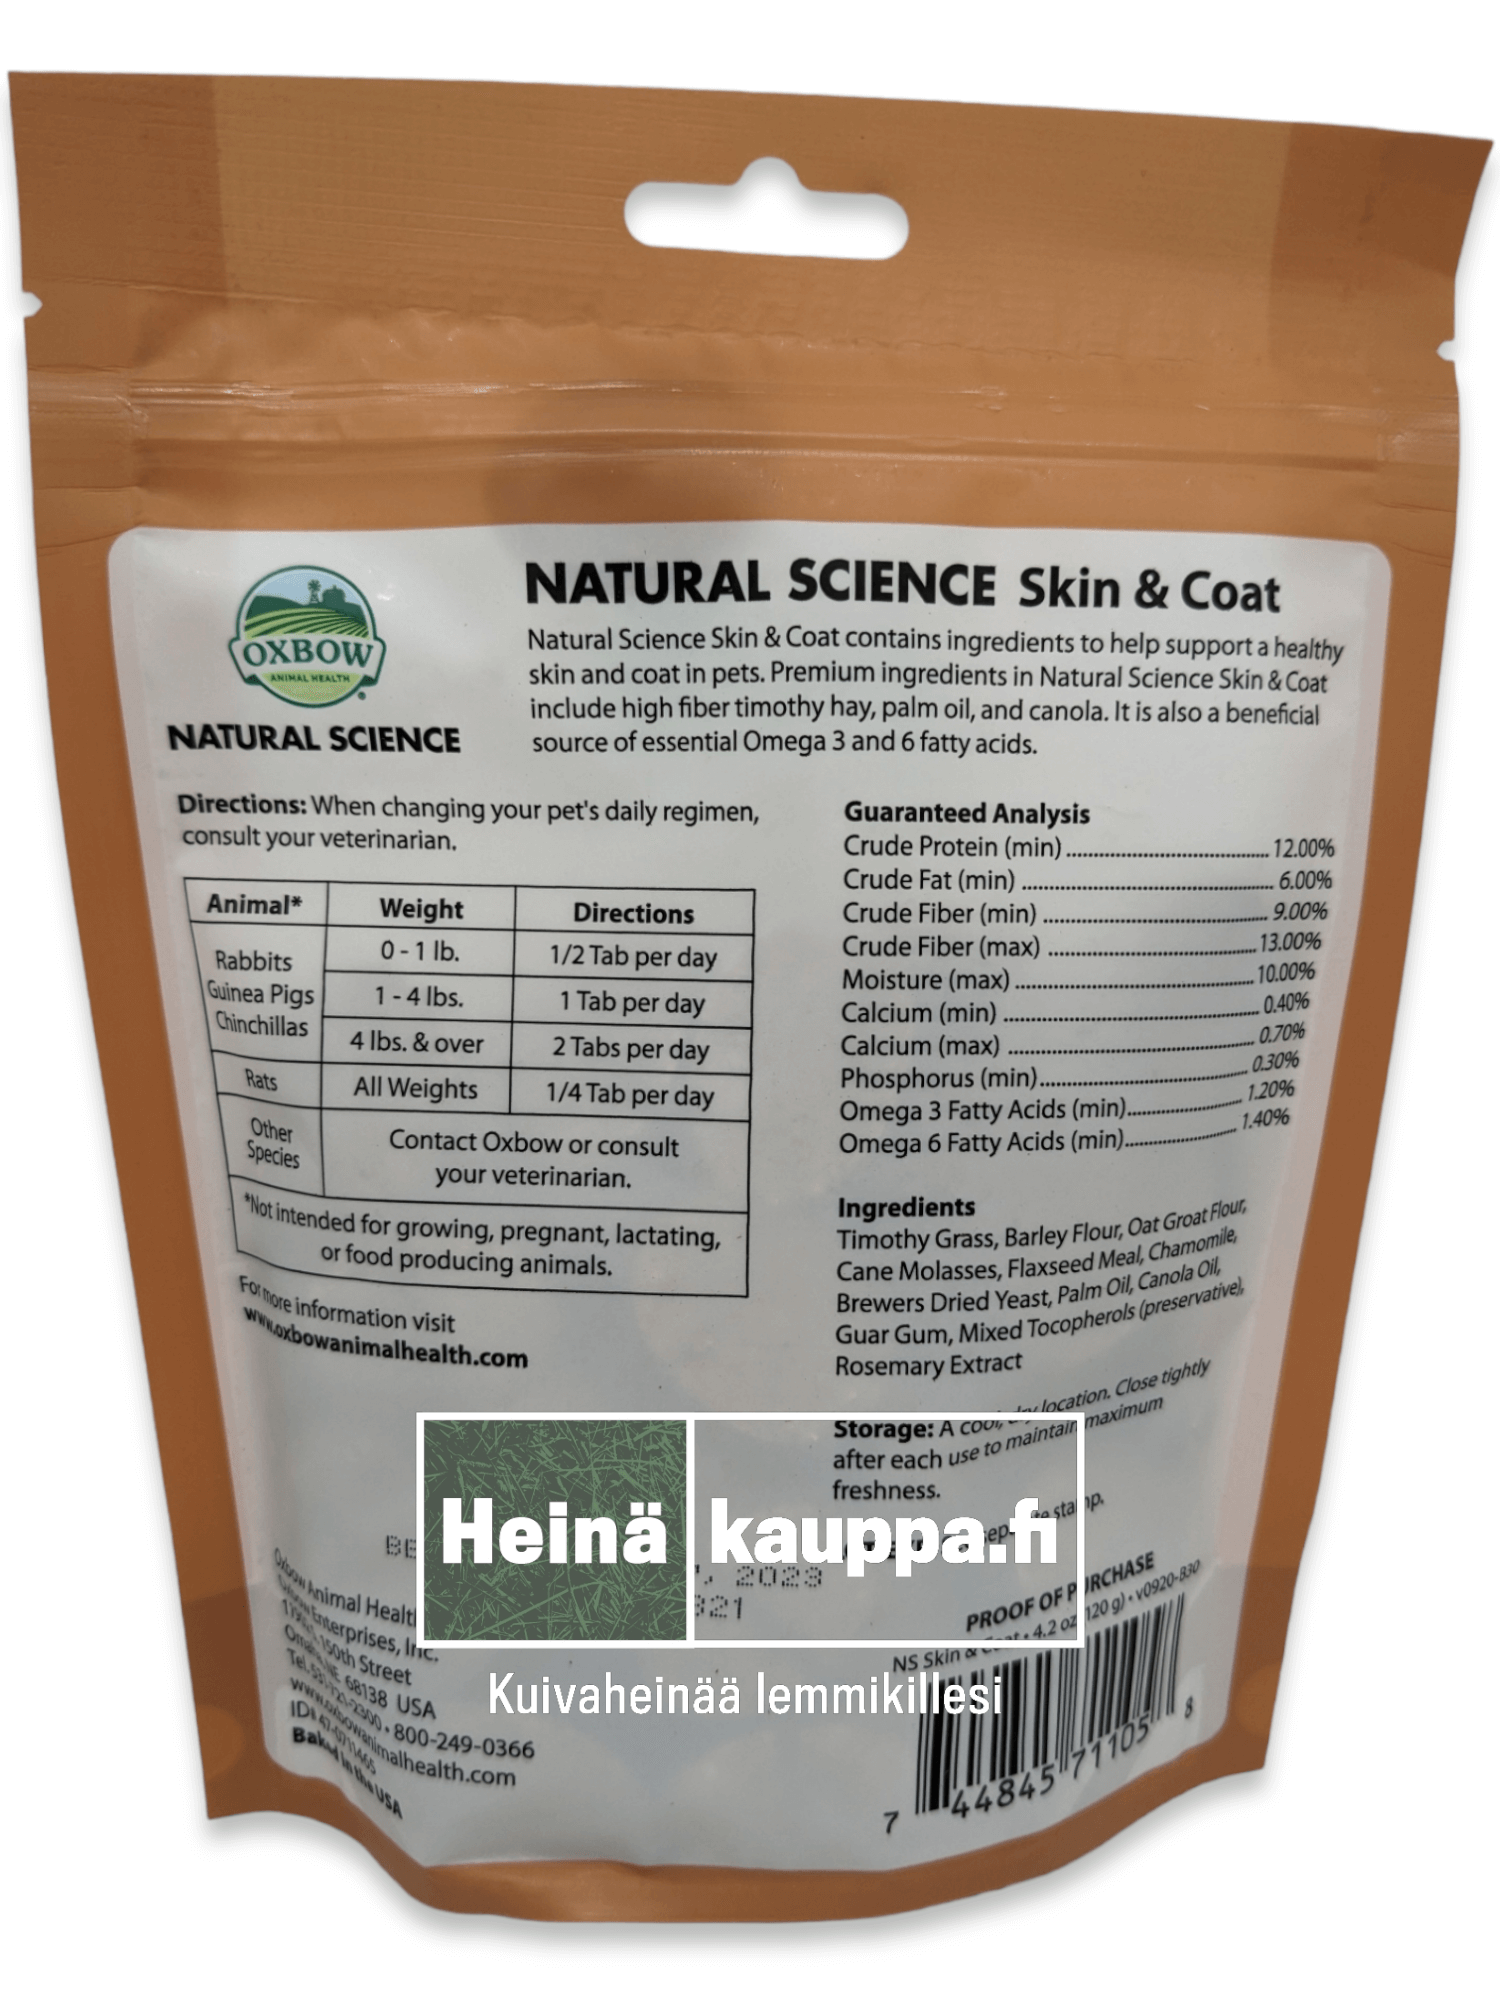 Oxbow natural science skin and coat